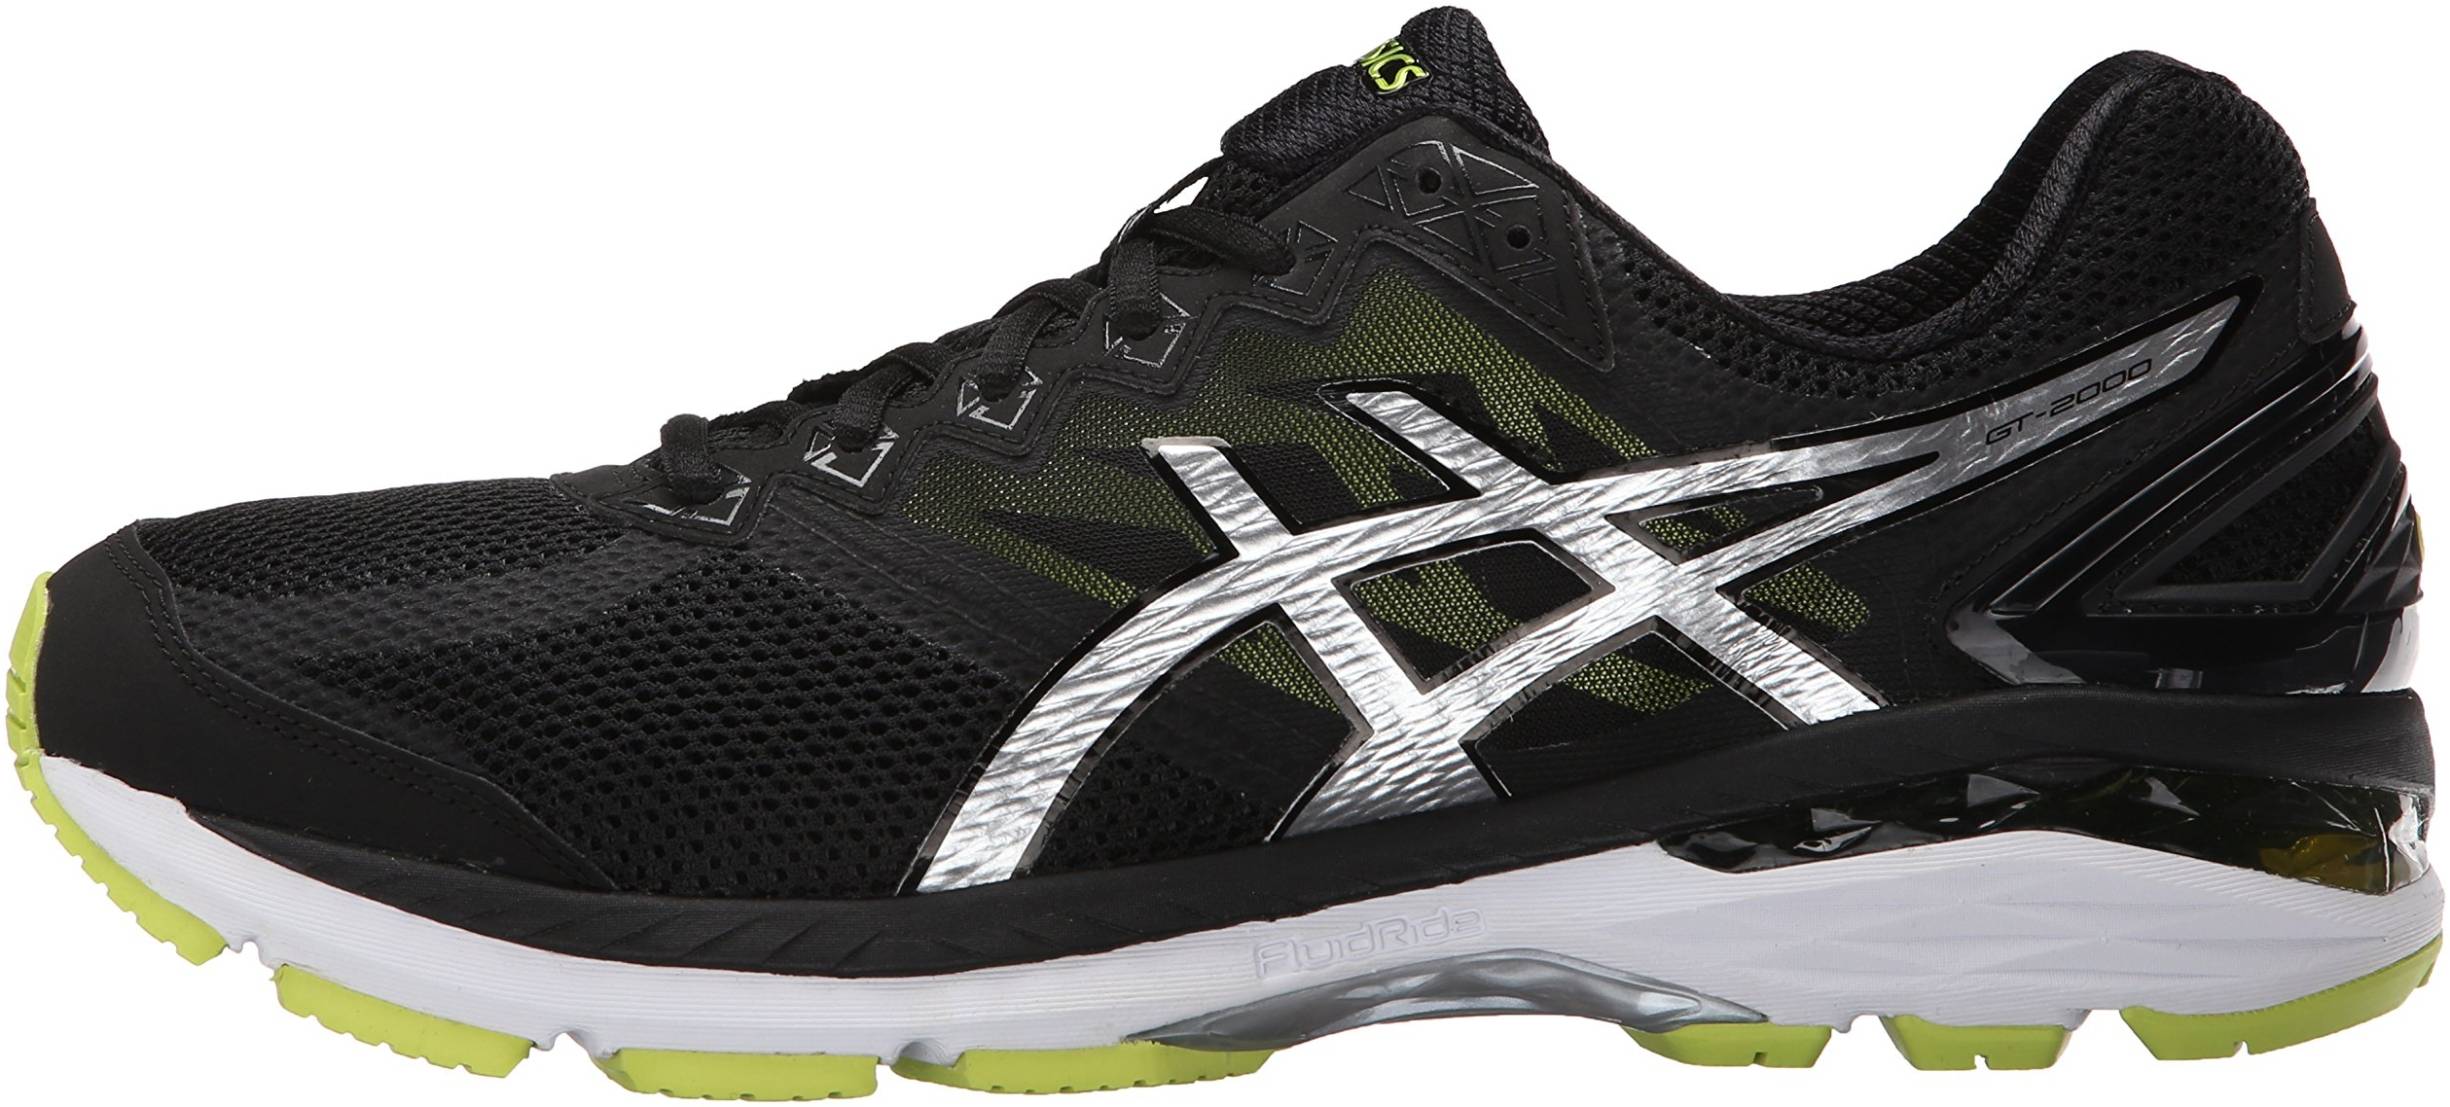 Asics GT 2000 4 Review 2022, Facts 